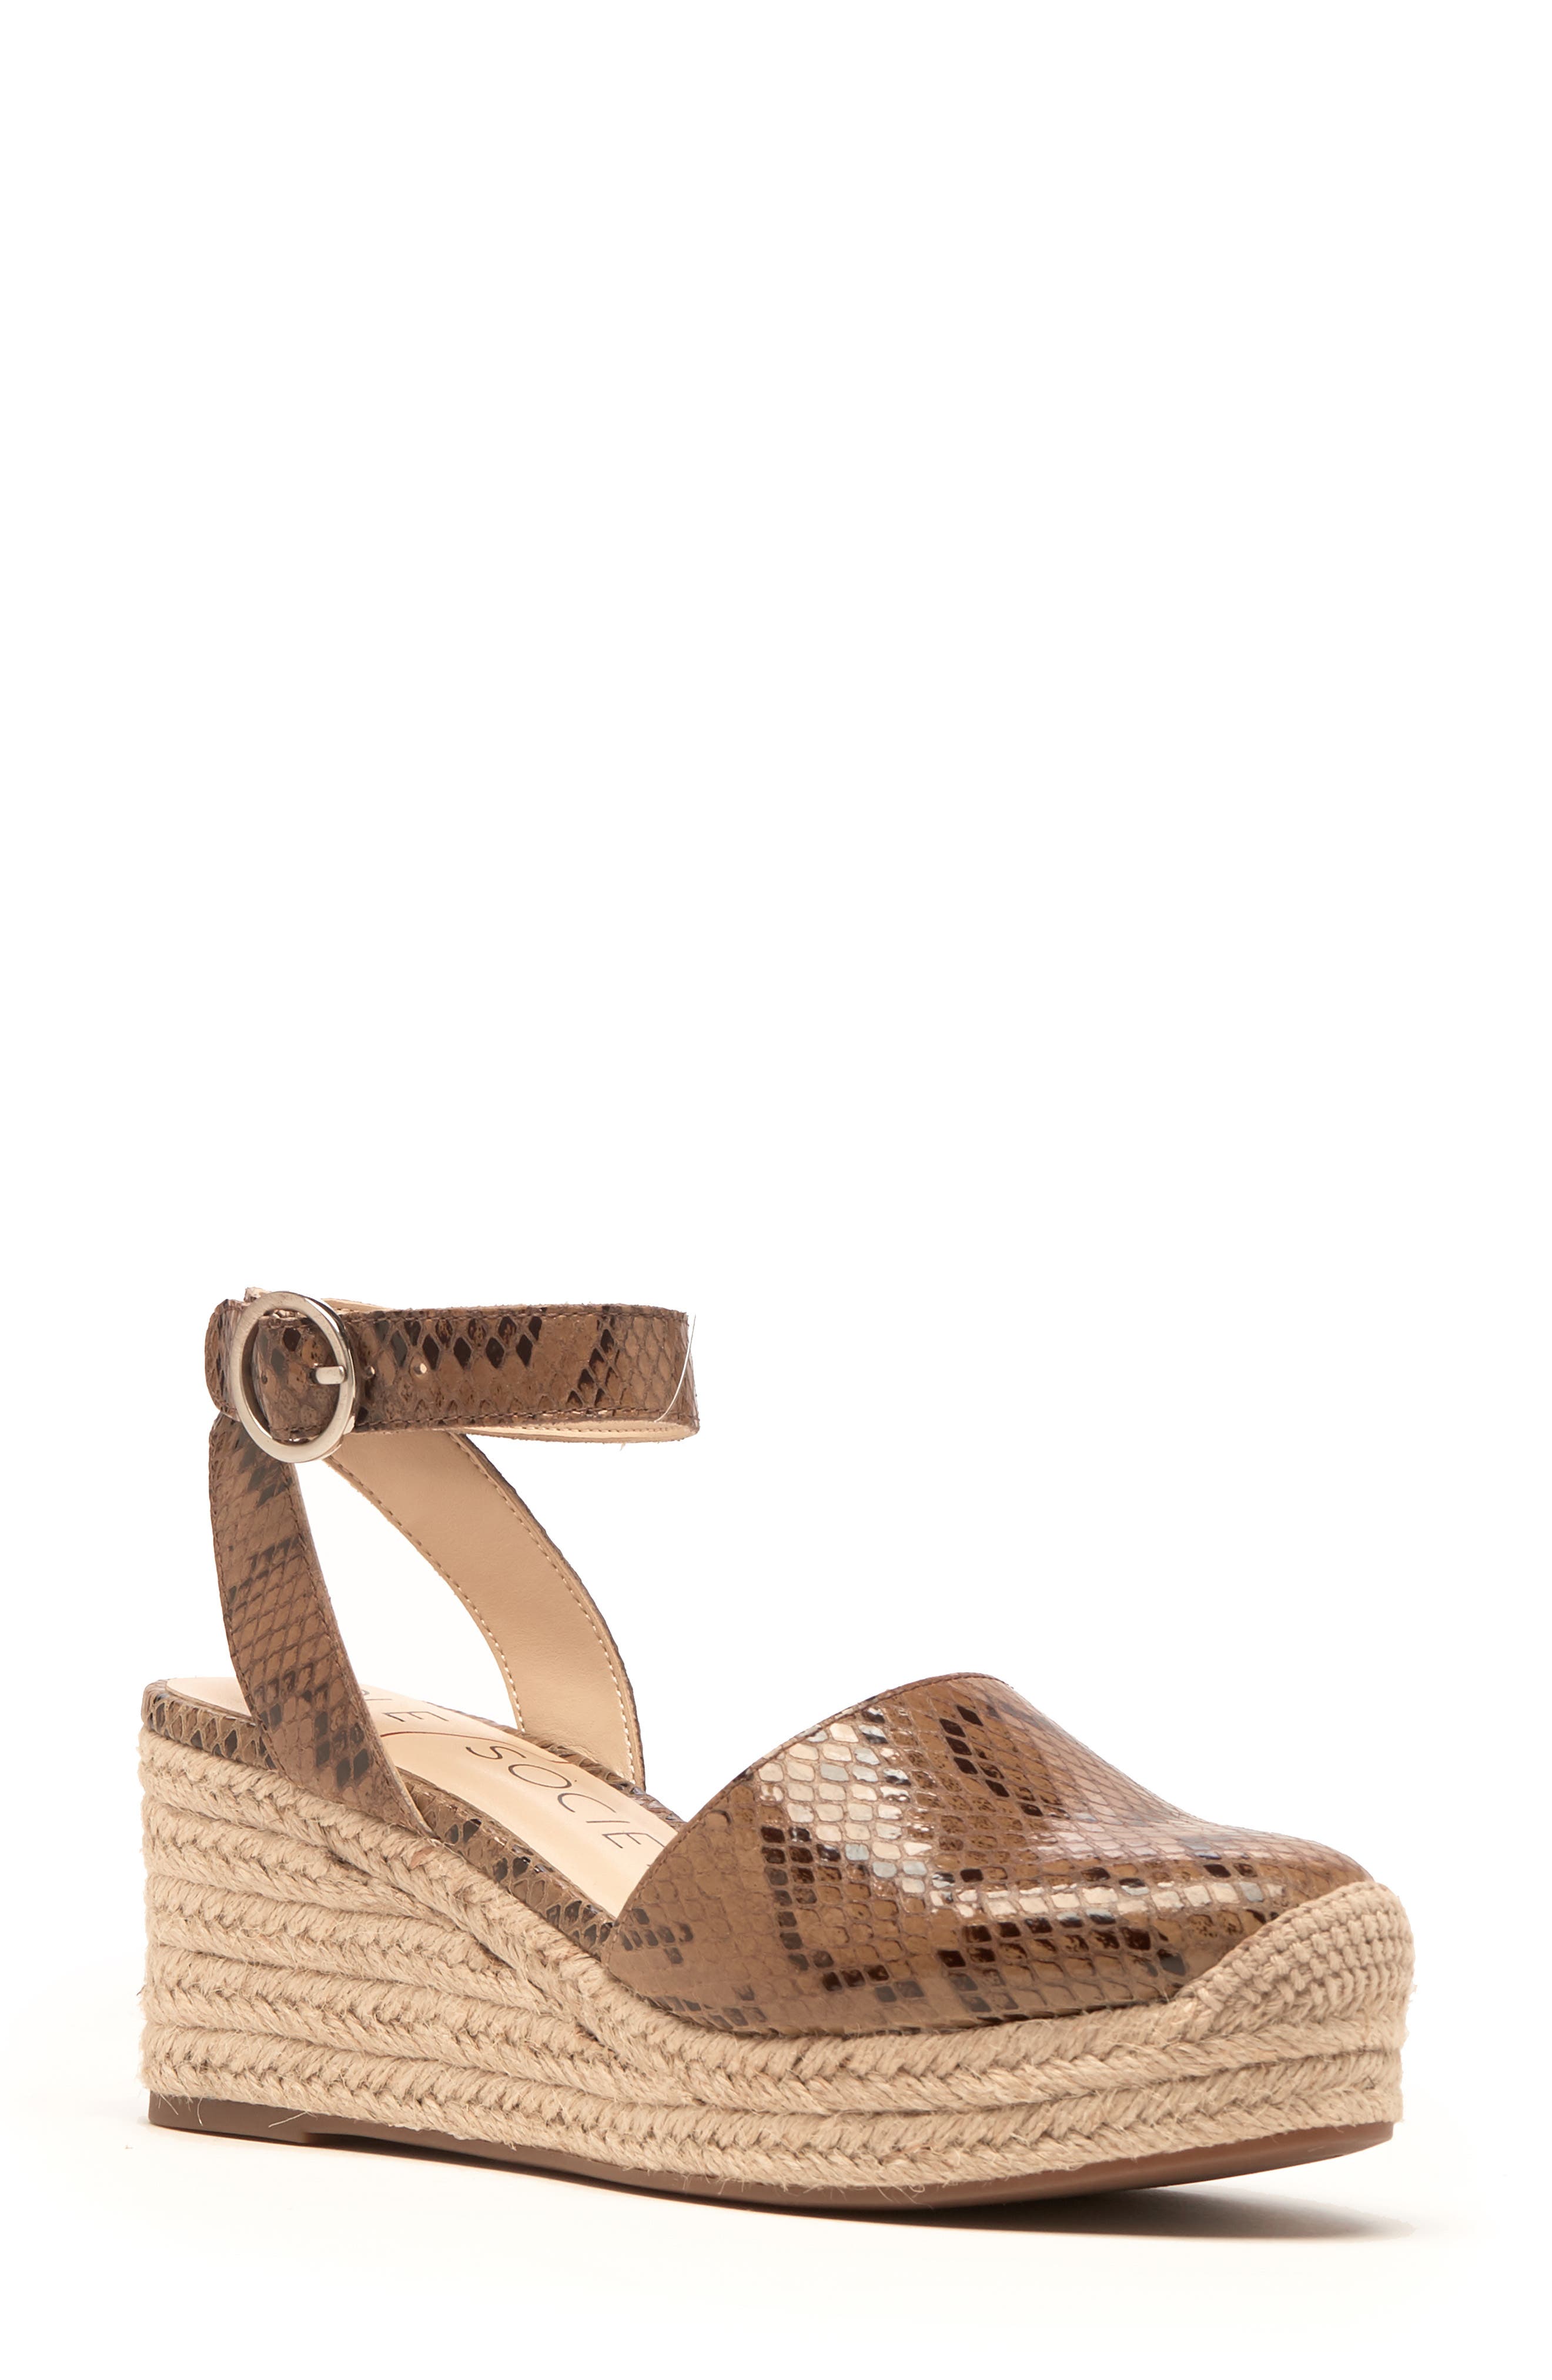 Sole Society Channing Espadrille Sandal 